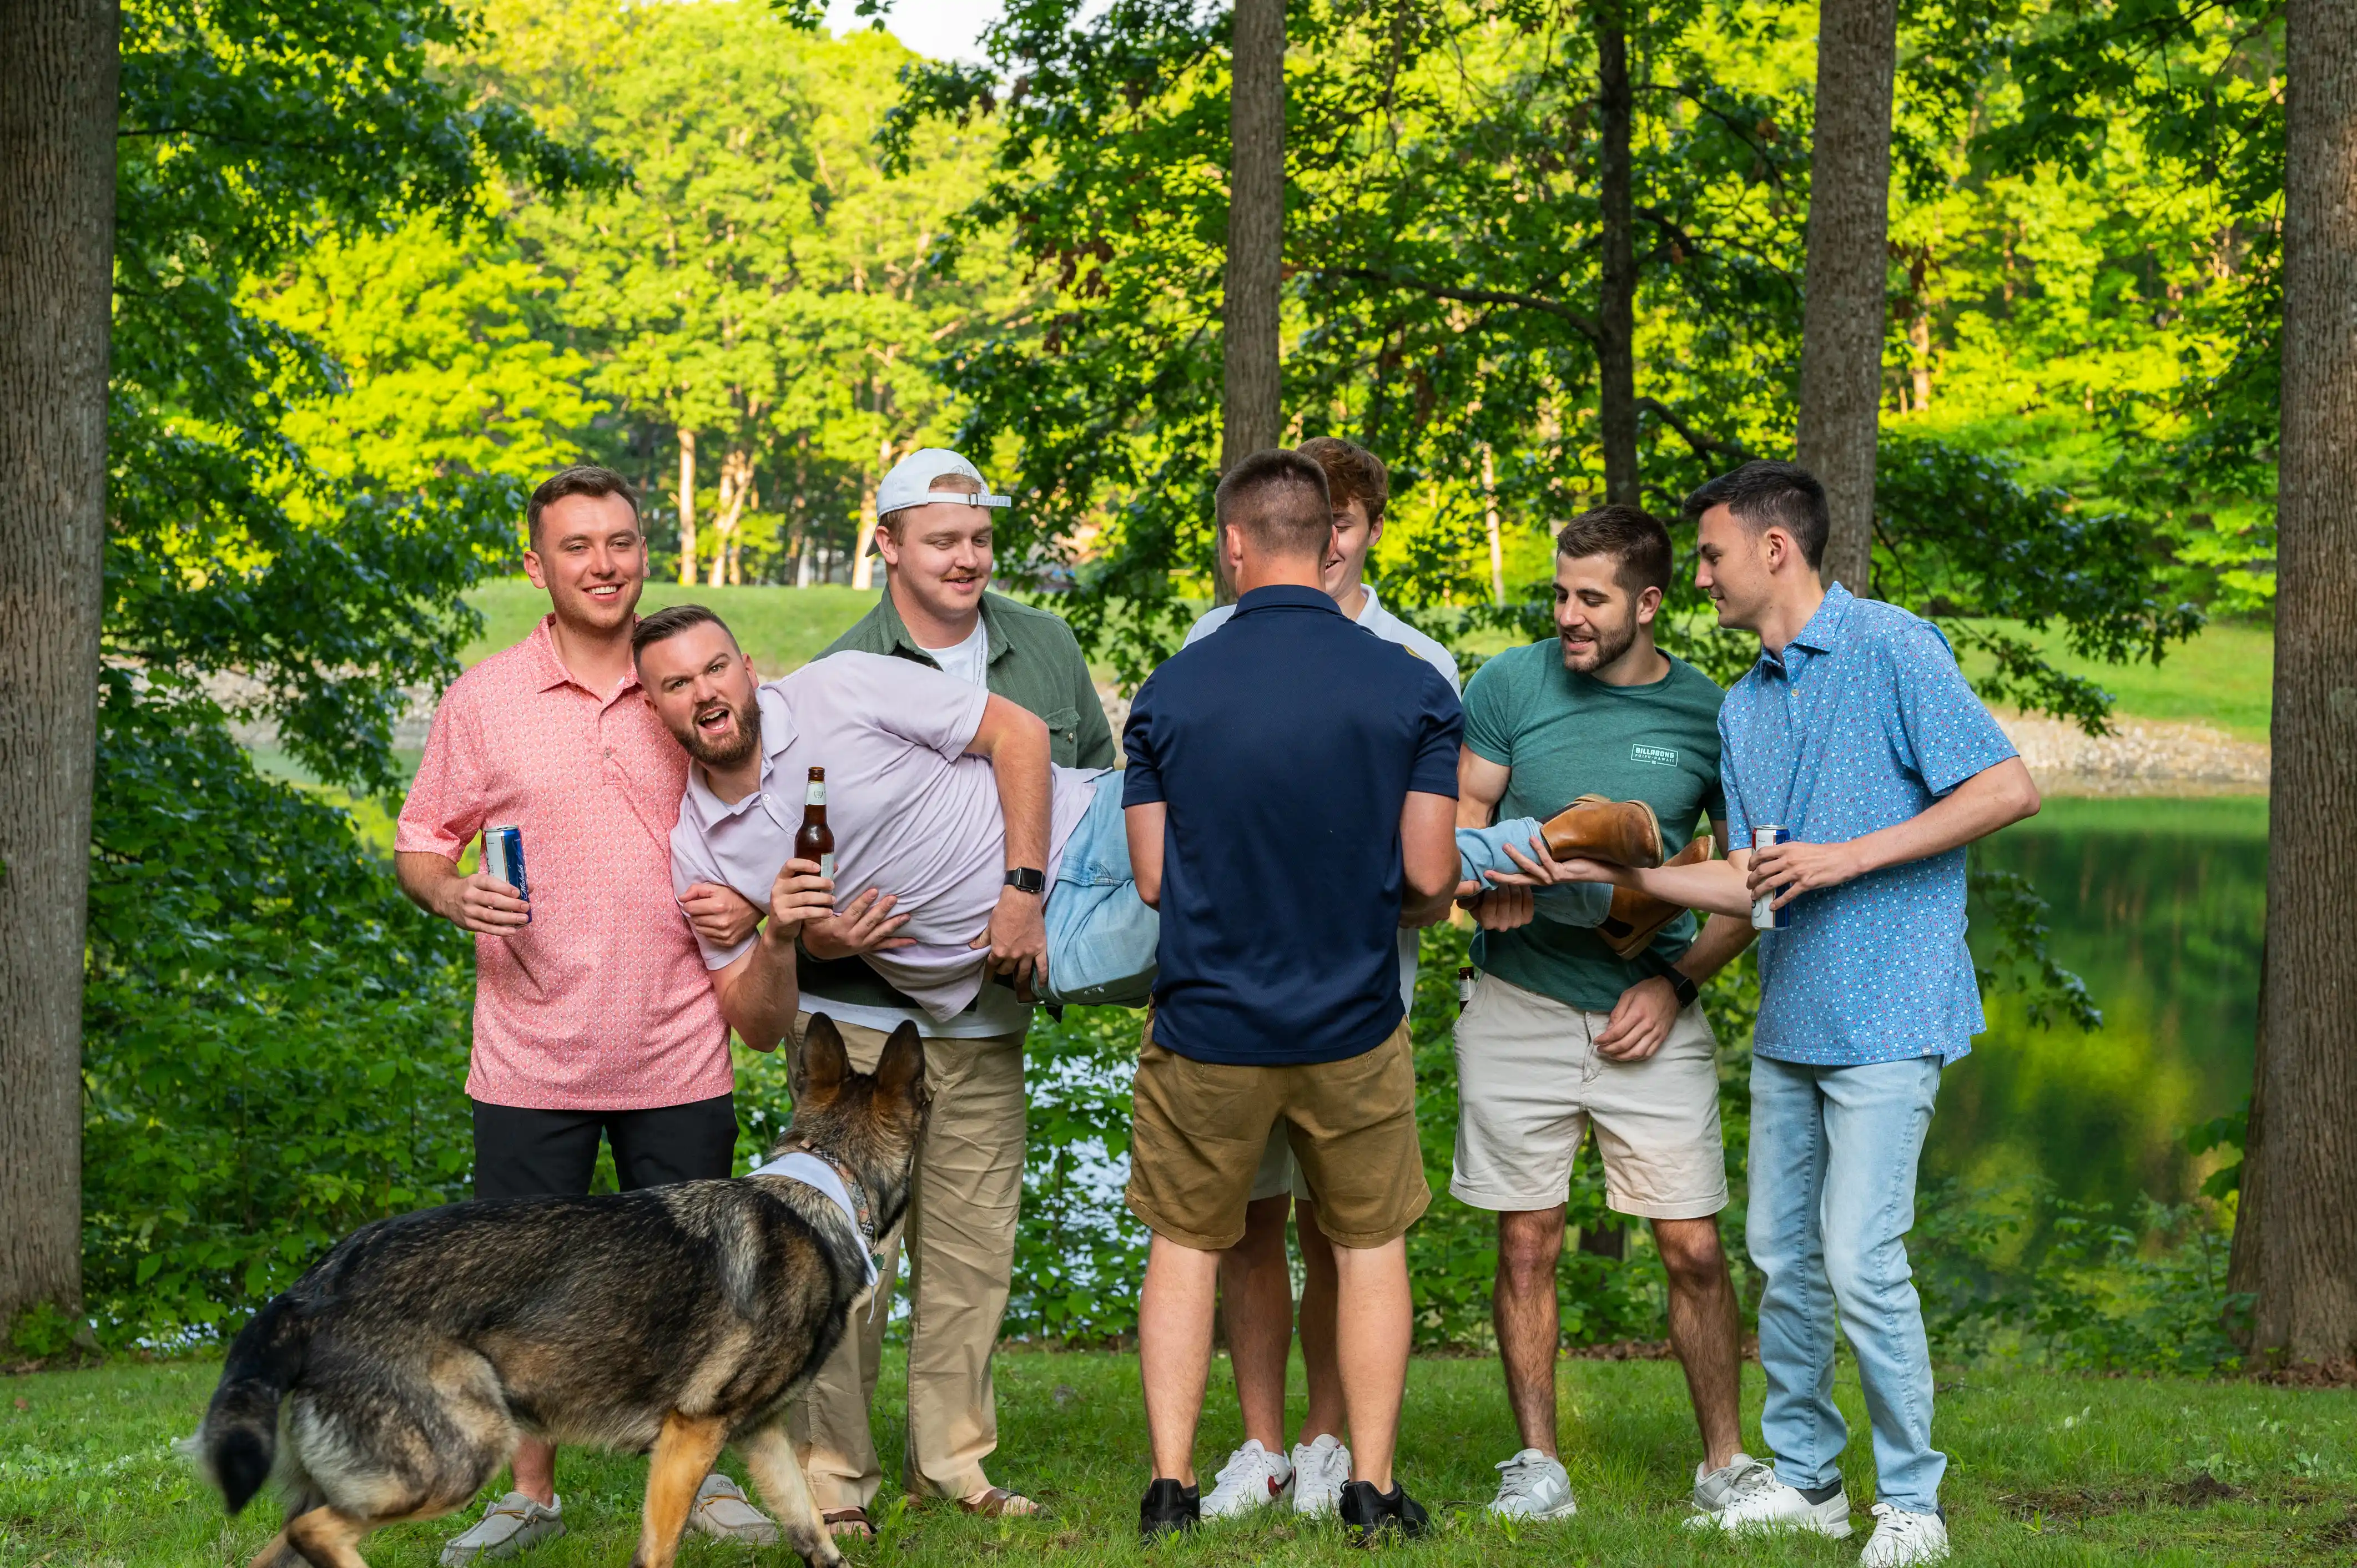 Group of friends enjoying a barbecue in a park with a dog walking by.